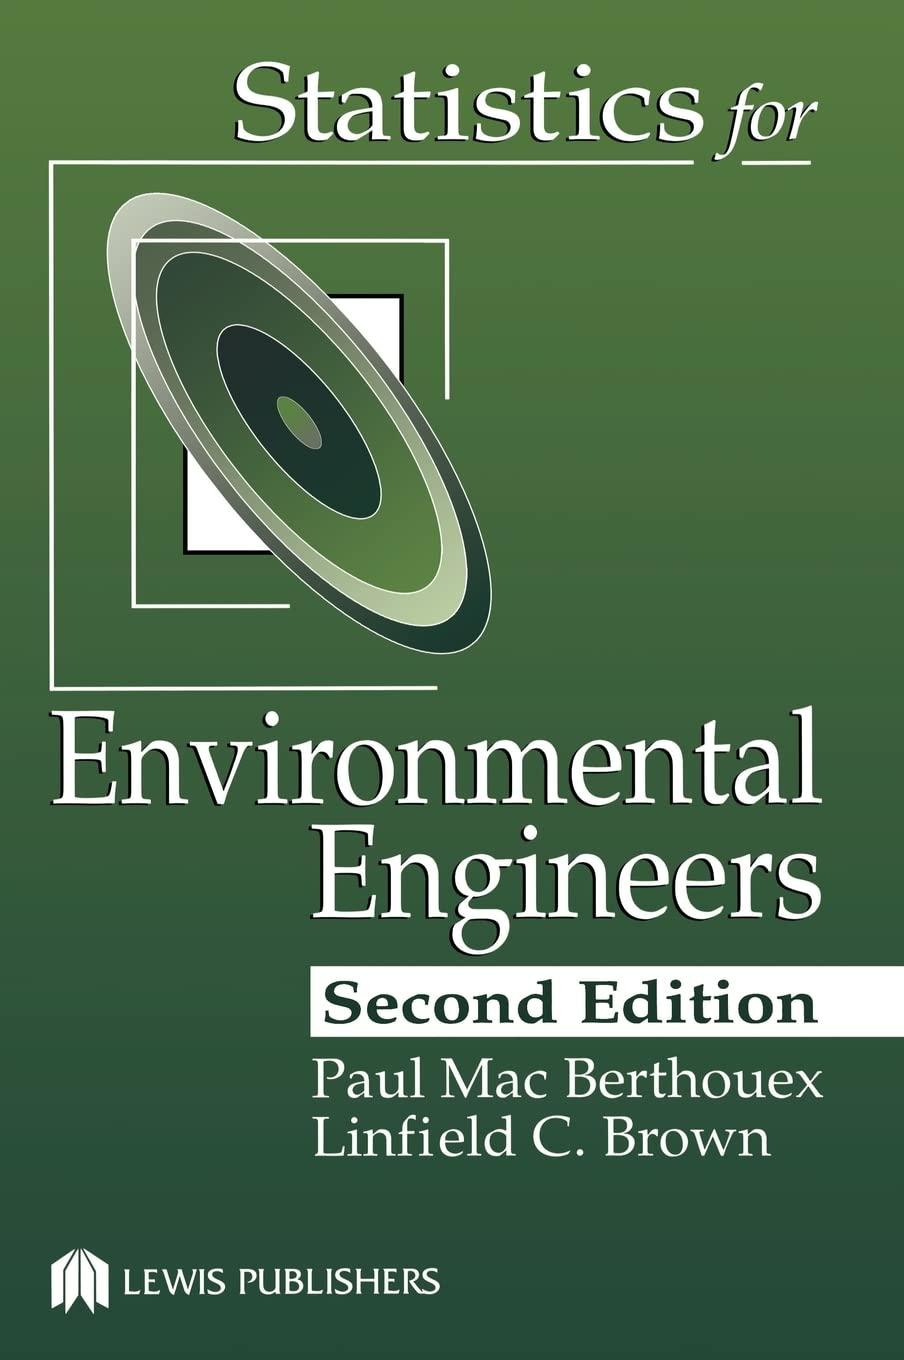 statistics for environmental engineers 2nd edition paul berthouex, linfield brown 1566705924, 9781566705929